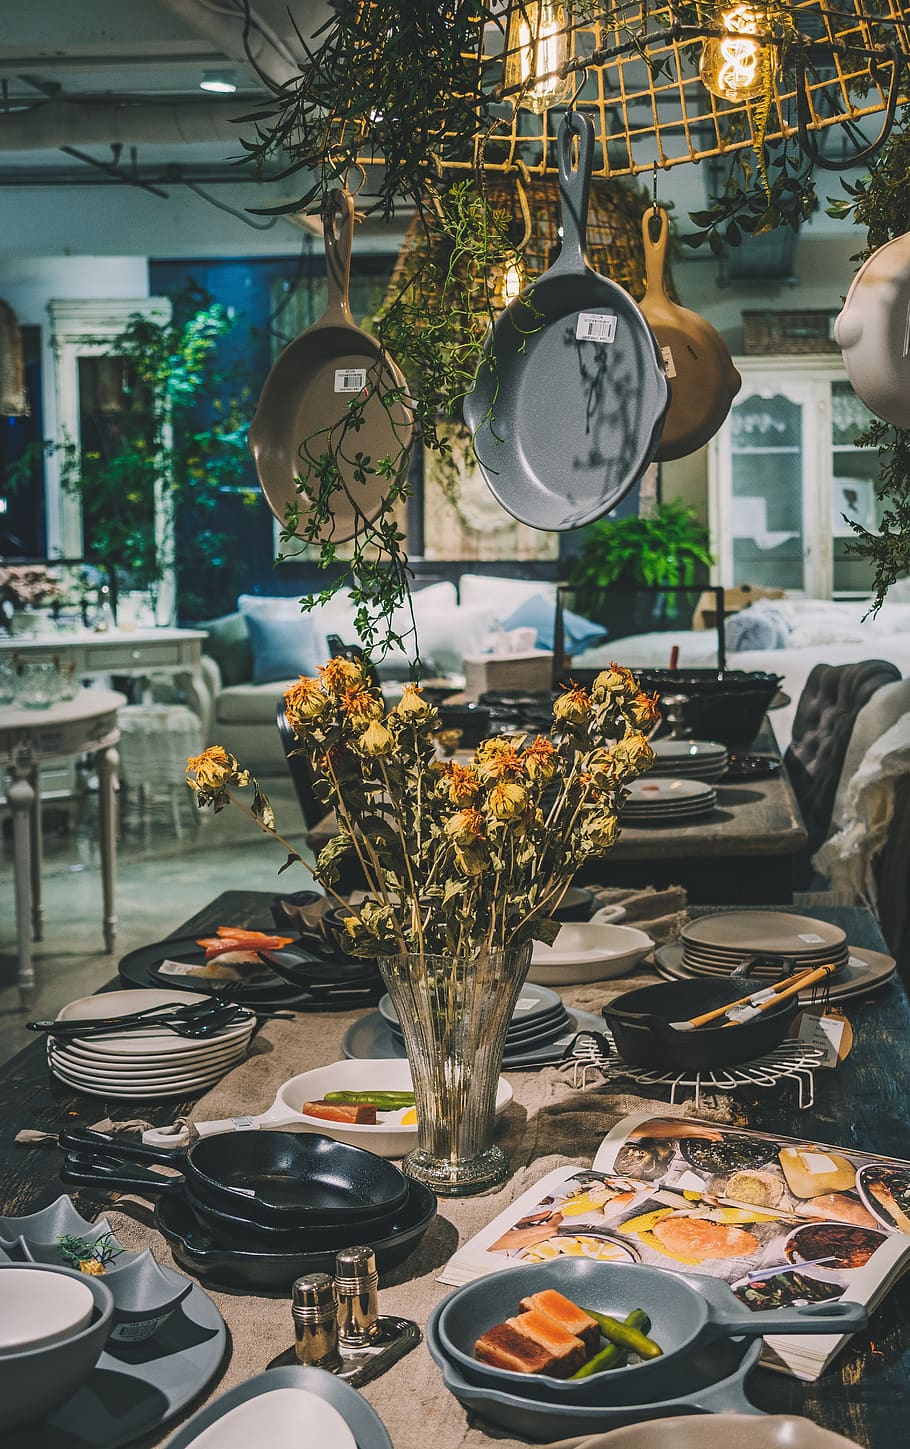 yellow-petaled flowers surrounded by dinnerware set, indoors